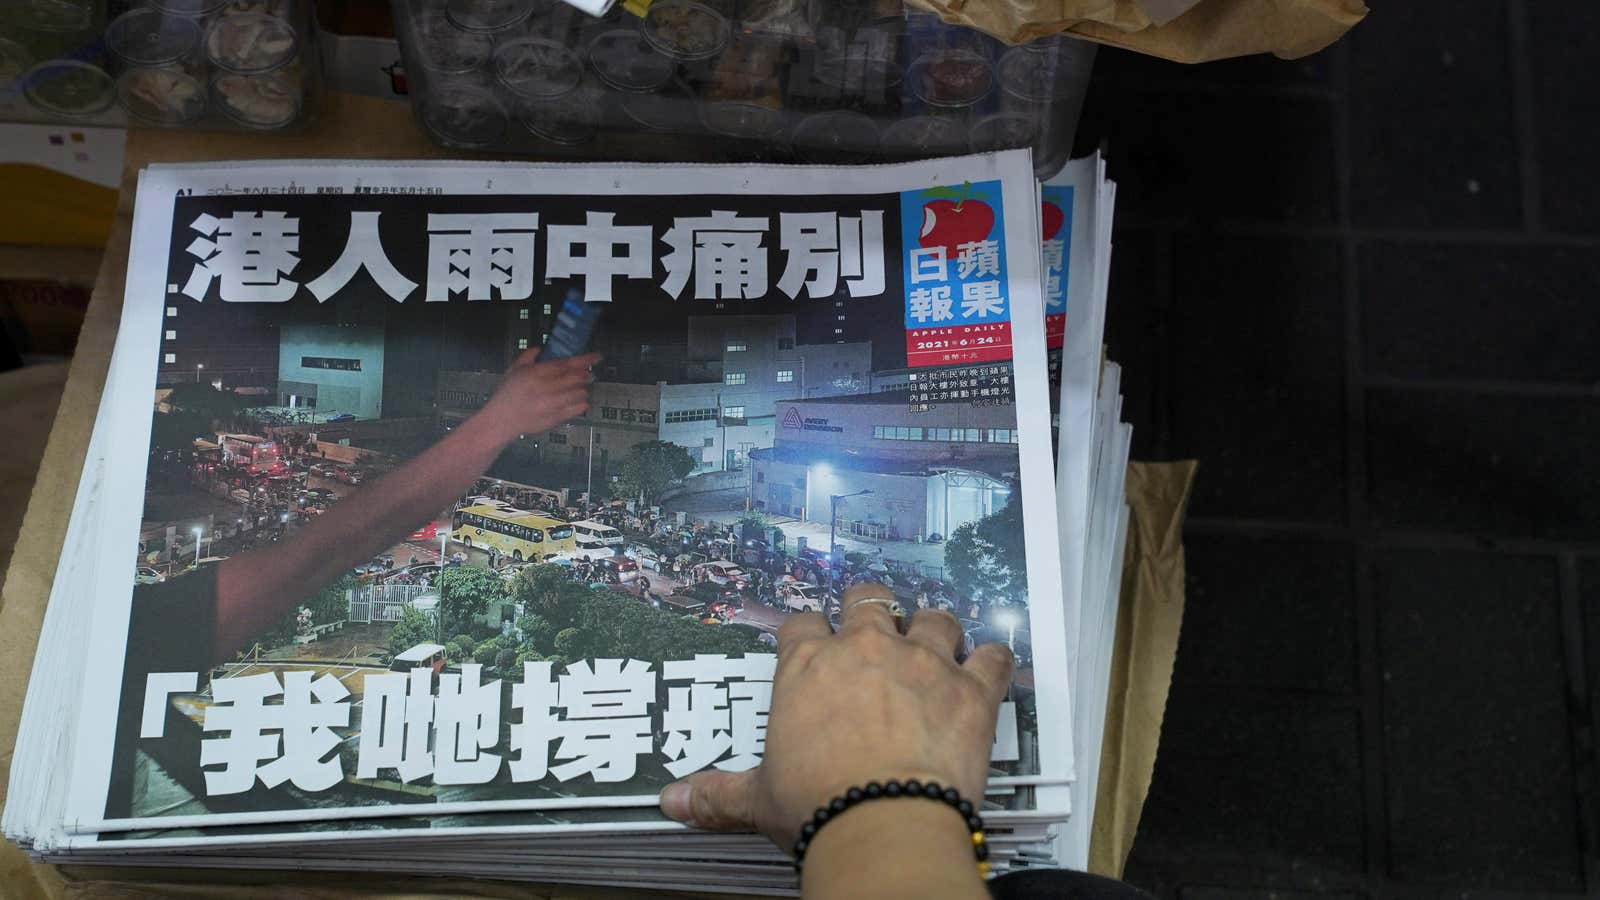 The last headline: “Hong Kongers bid a painful farewell in the rain: ‘We support Apple Daily’”